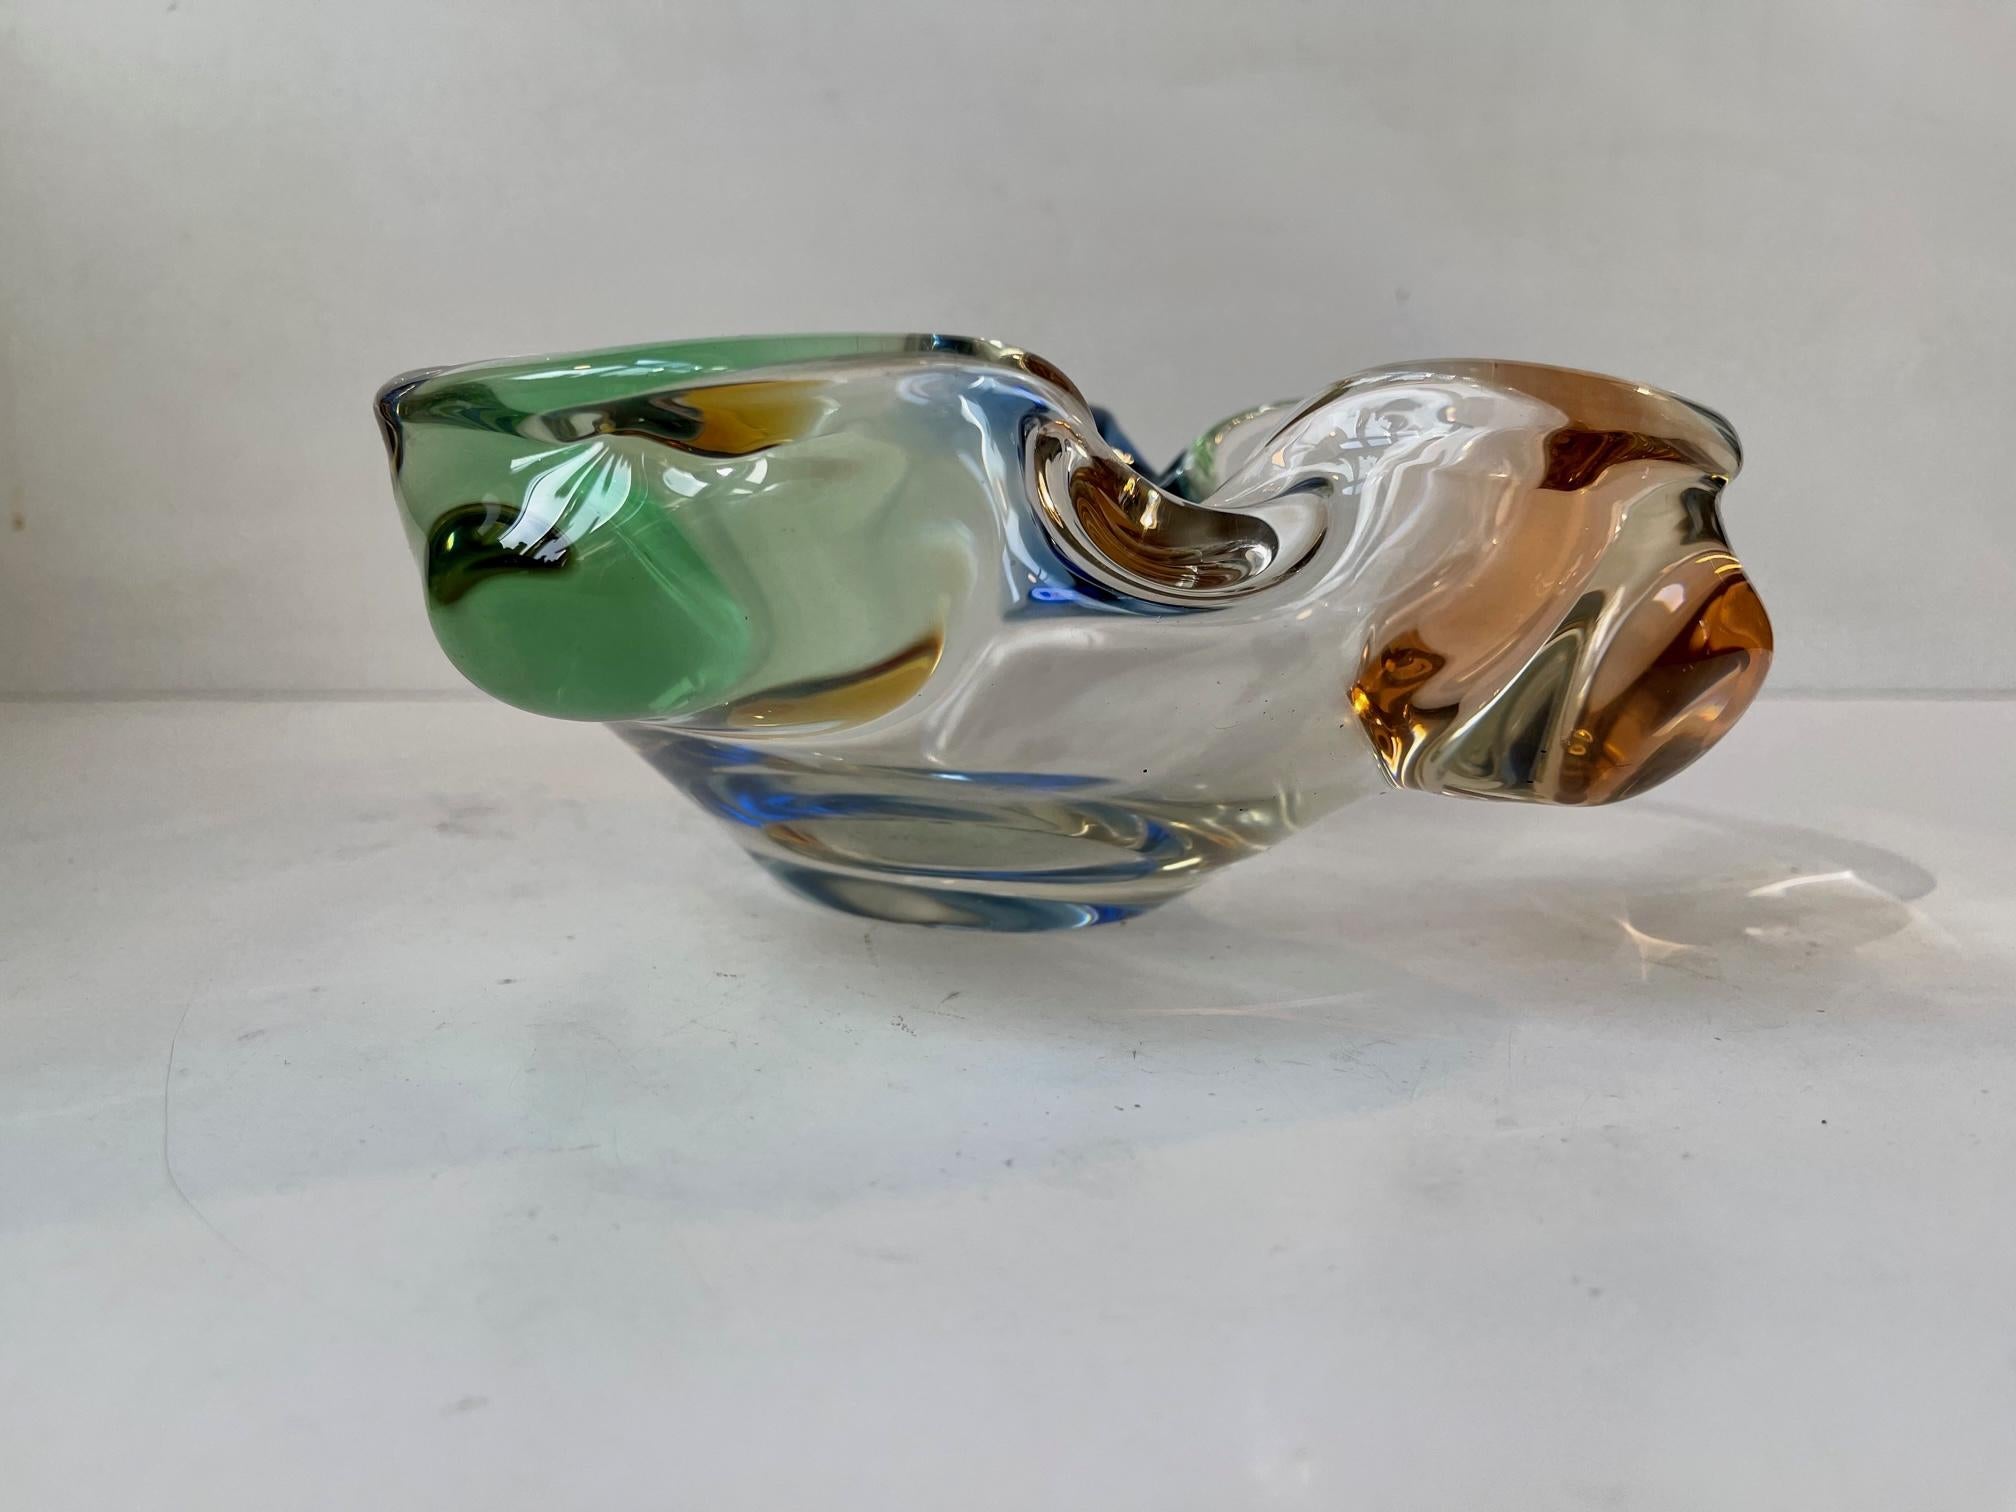 Variation of the Rhapsody Art Glass where diffrent colors of clear glass are blown together during heating. Designed by Czech glass blower Frantisek Zemek at his studio Mstisov during the early 1960s. Measurements: W: 23, D: 16, H: 7.5 cm.